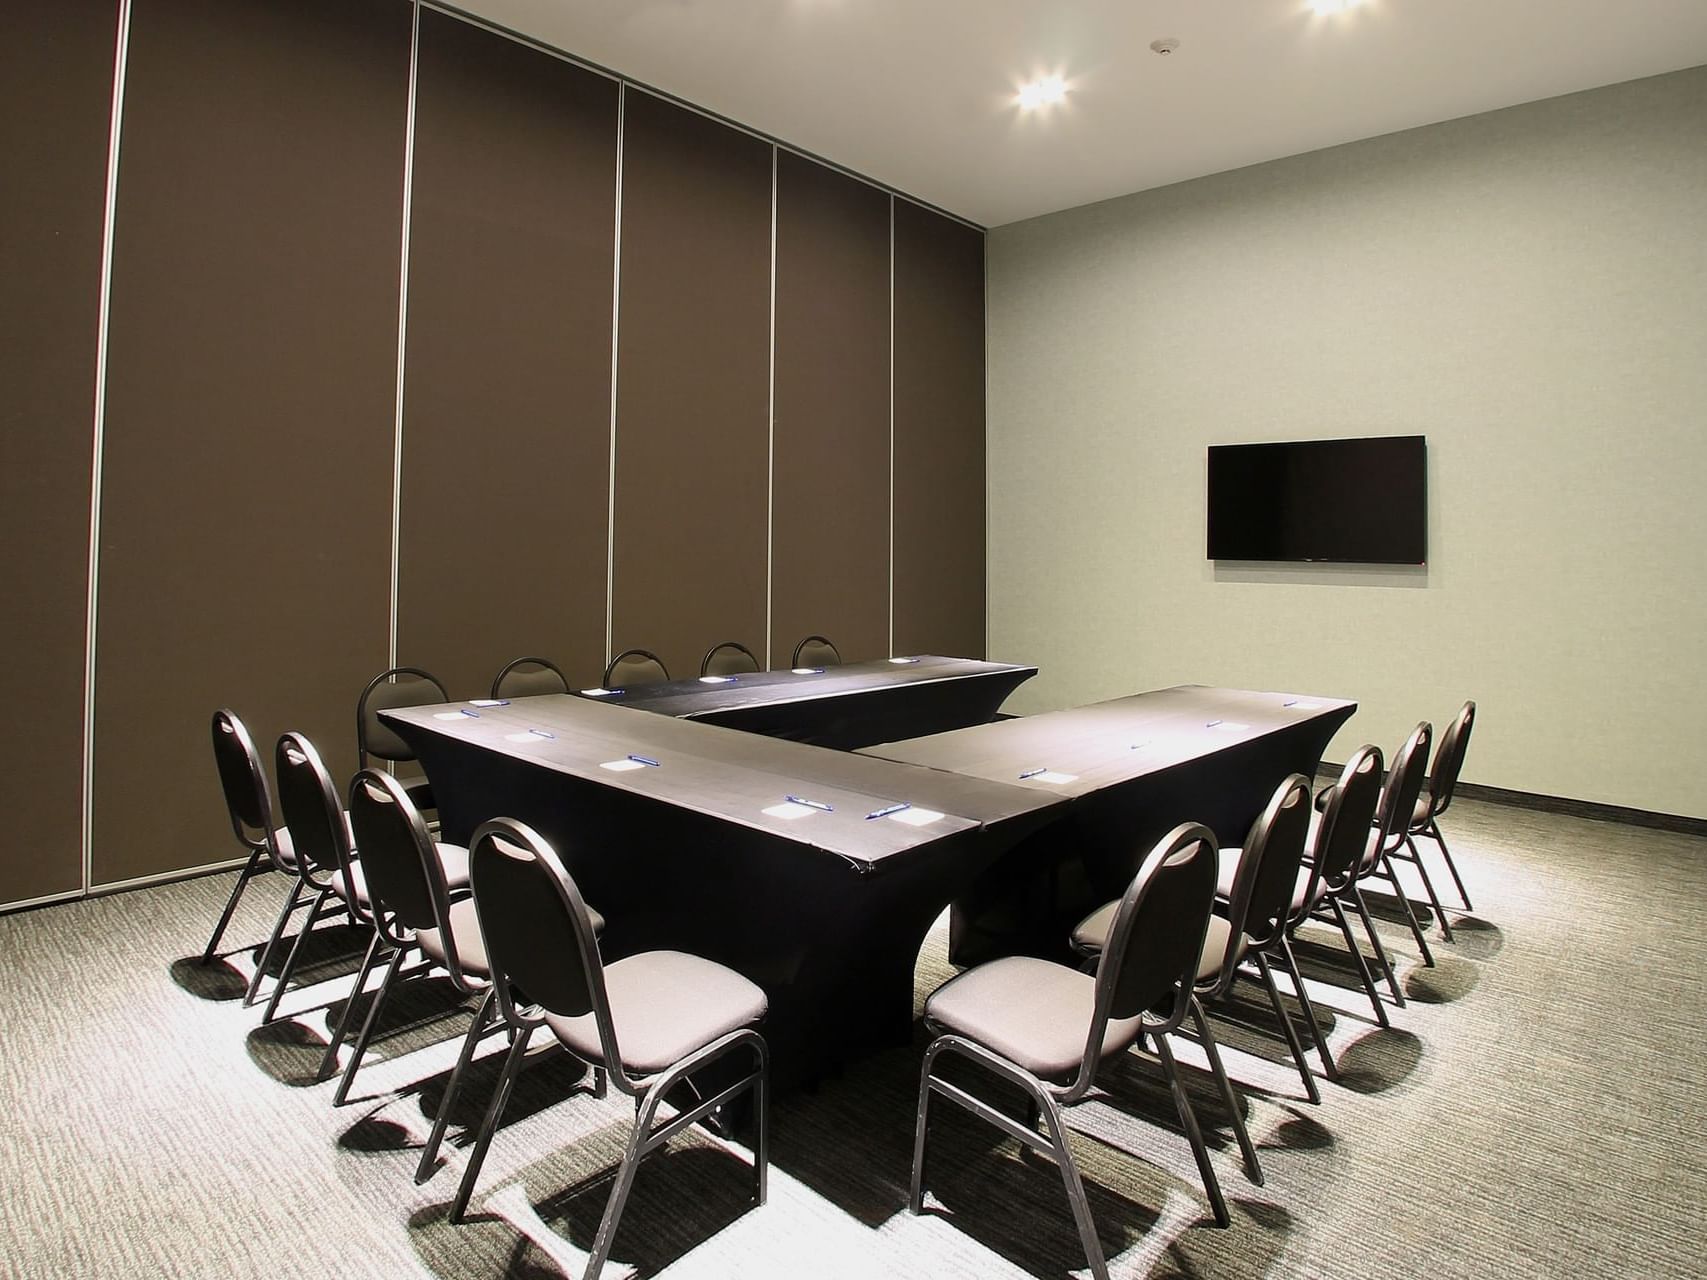 U-style meeting table arranged in a meeting room at One Hotels